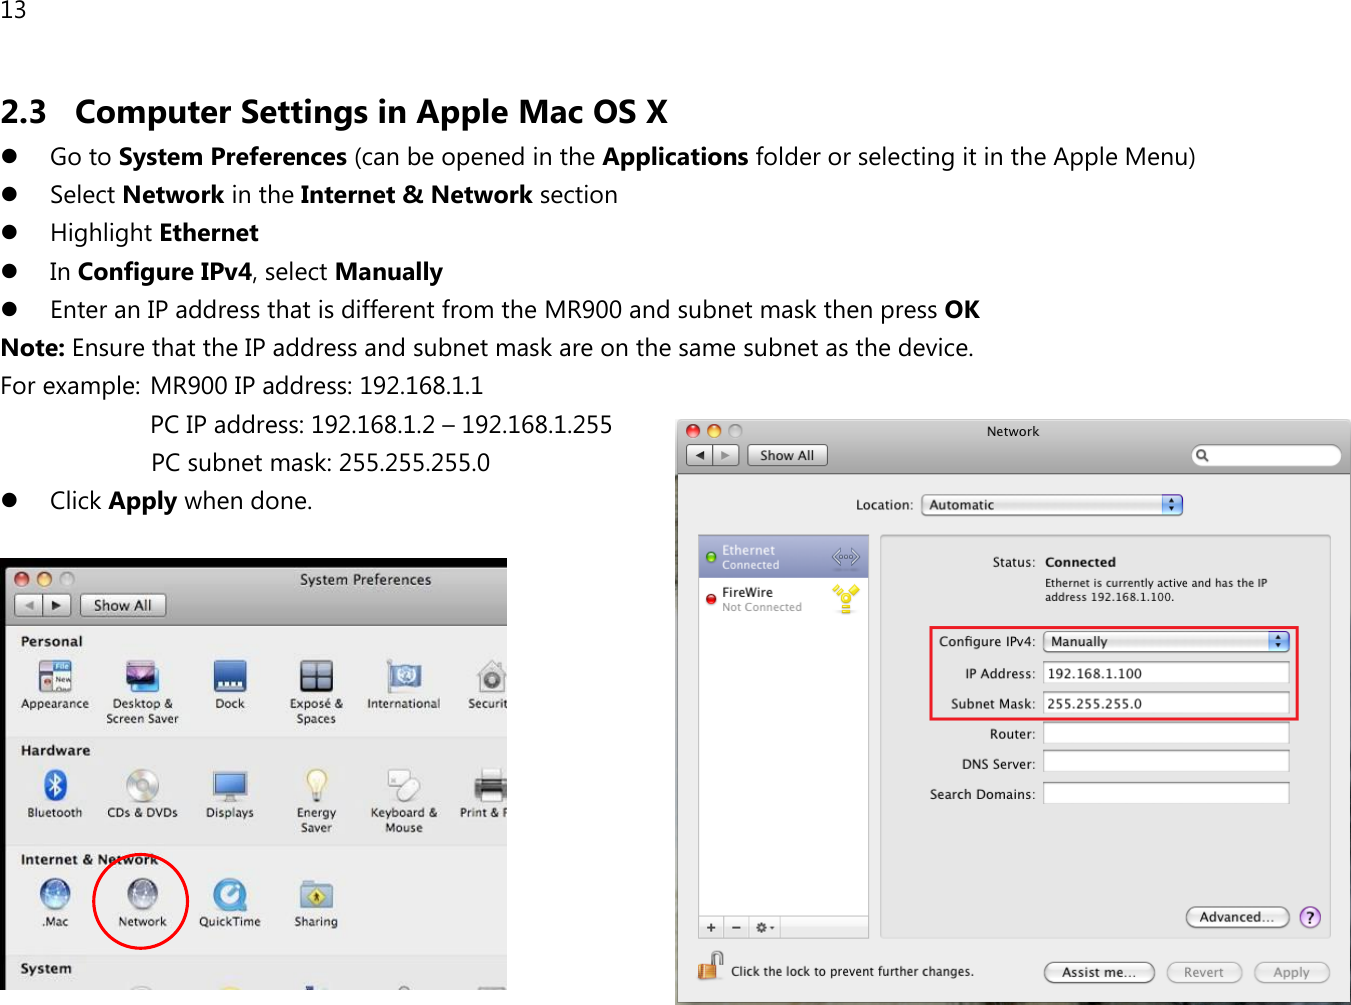 13 2.3 Computer Settings in Apple Mac OS X  Go to System Preferences (can be opened in the Applications folder or selecting it in the Apple Menu)  Select Network in the Internet &amp; Network section  Highlight Ethernet  In Configure IPv4, select Manually  Enter an IP address that is different from the MR900 and subnet mask then press OK Note: Ensure that the IP address and subnet mask are on the same subnet as the device.   For example:  MR900 IP address: 192.168.1.1 PC IP address: 192.168.1.2 – 192.168.1.255   PC subnet mask: 255.255.255.0  Click Apply when done.   